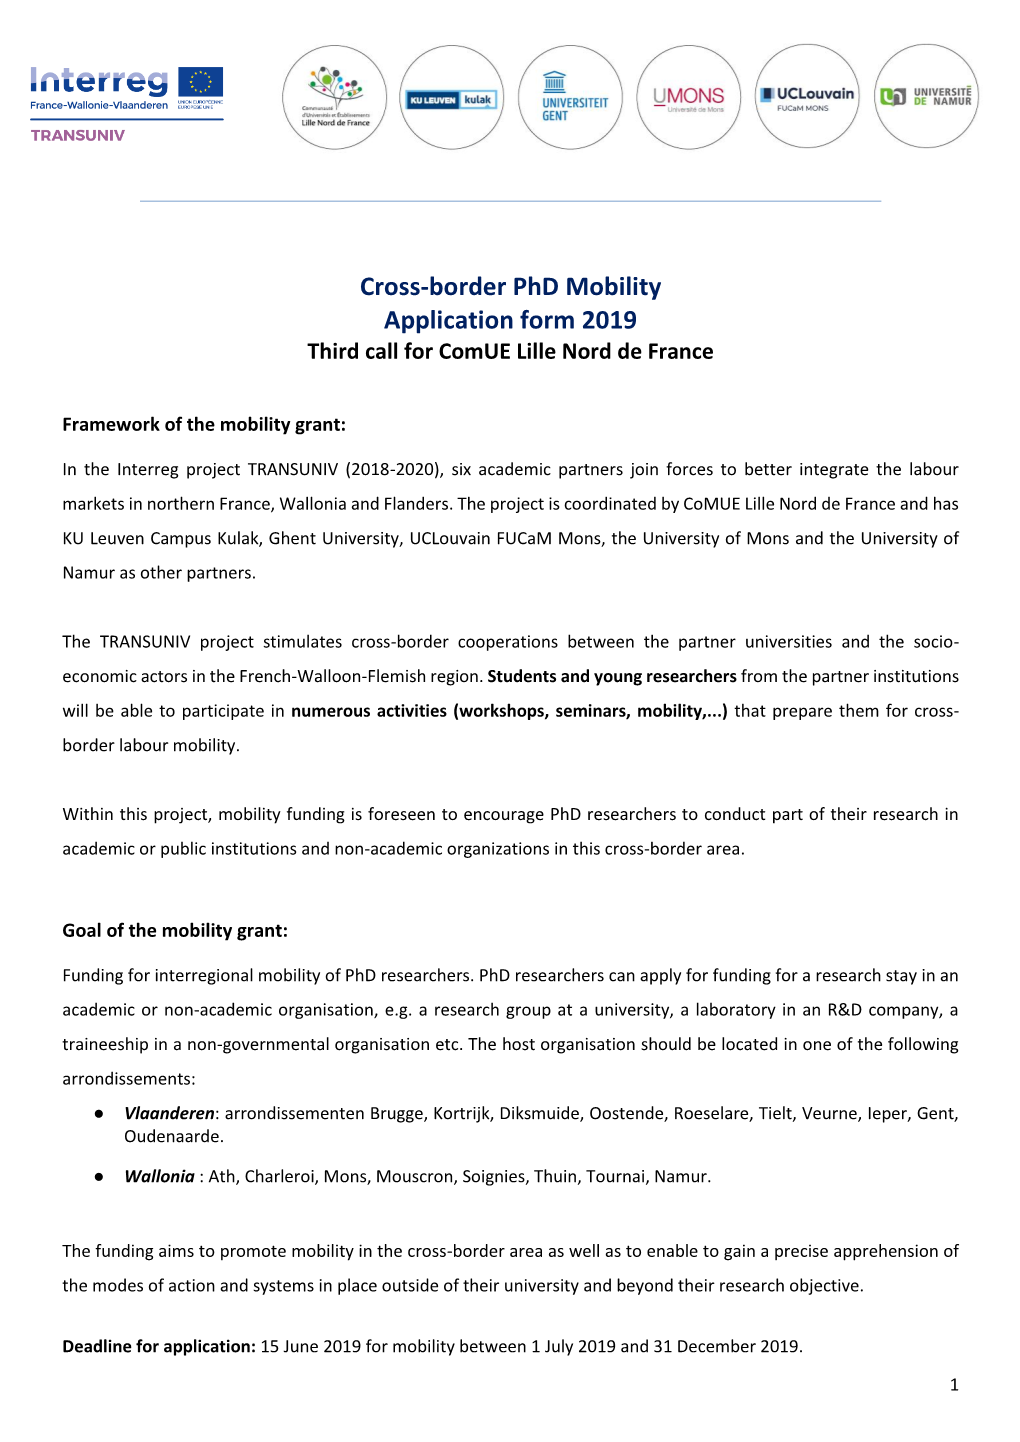 Cross-Border Phd Mobility Application Form 2019 Third Call for Comue Lille Nord De France